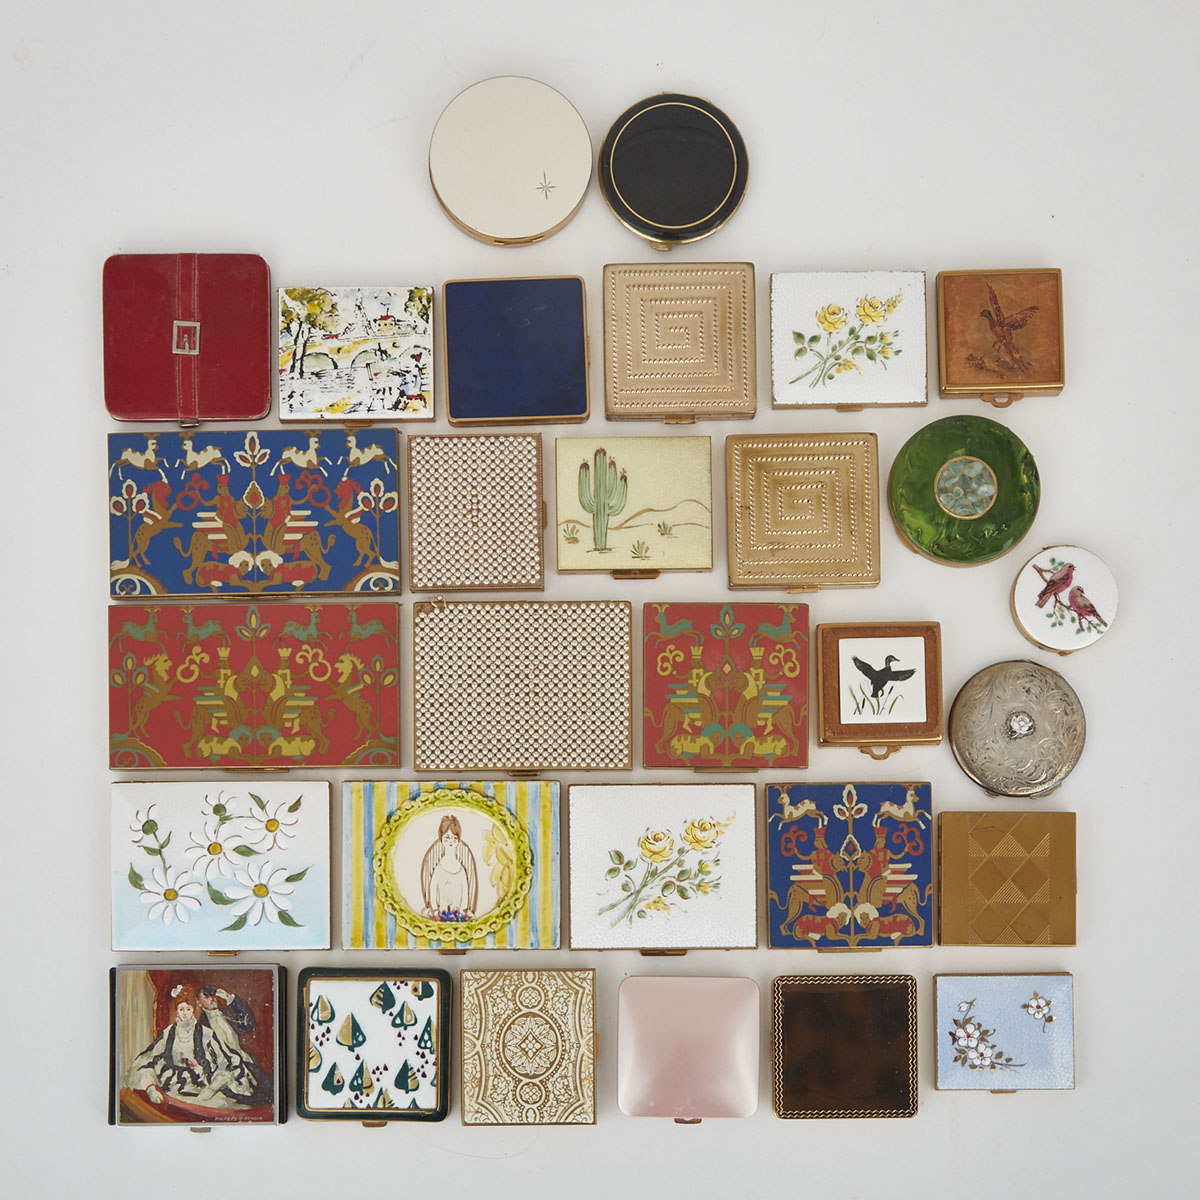 Collection of Approximately 30 Compacts Face Powder Compacts, and Cigarette Cases,mid 20th century